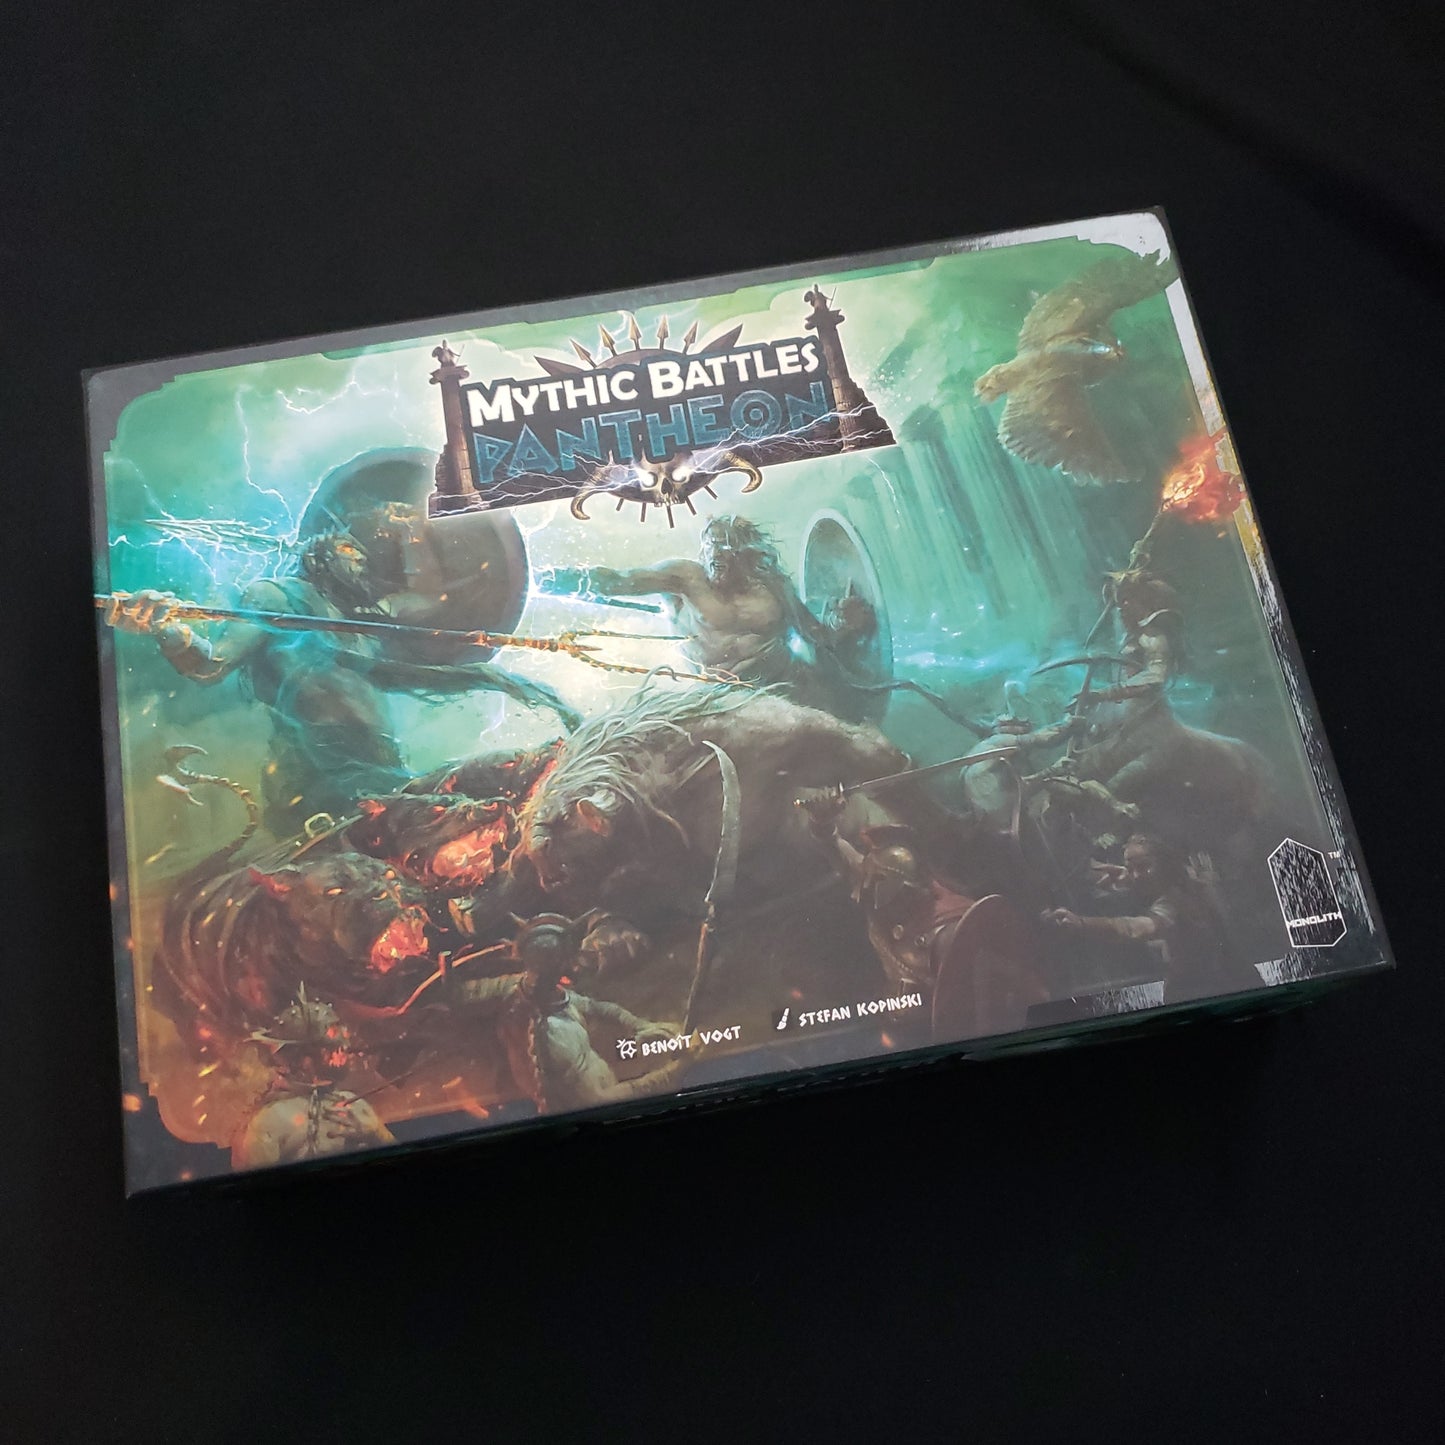 Image shows the front cover of the box of the Mythic Battles Pantheon board game